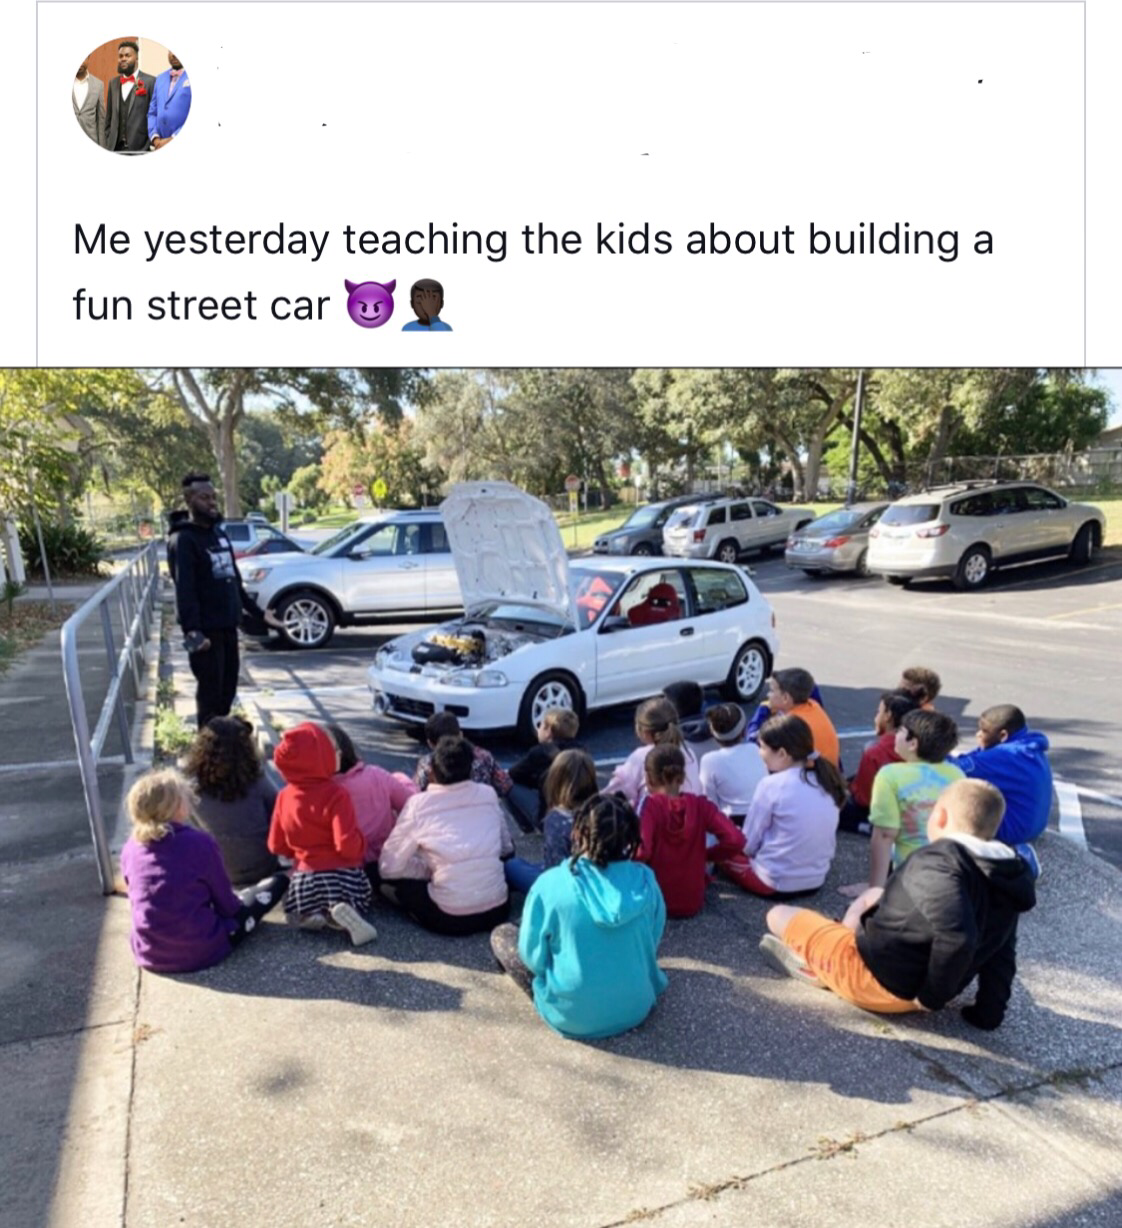 community - Me yesterday teaching the kids about building a fun street car